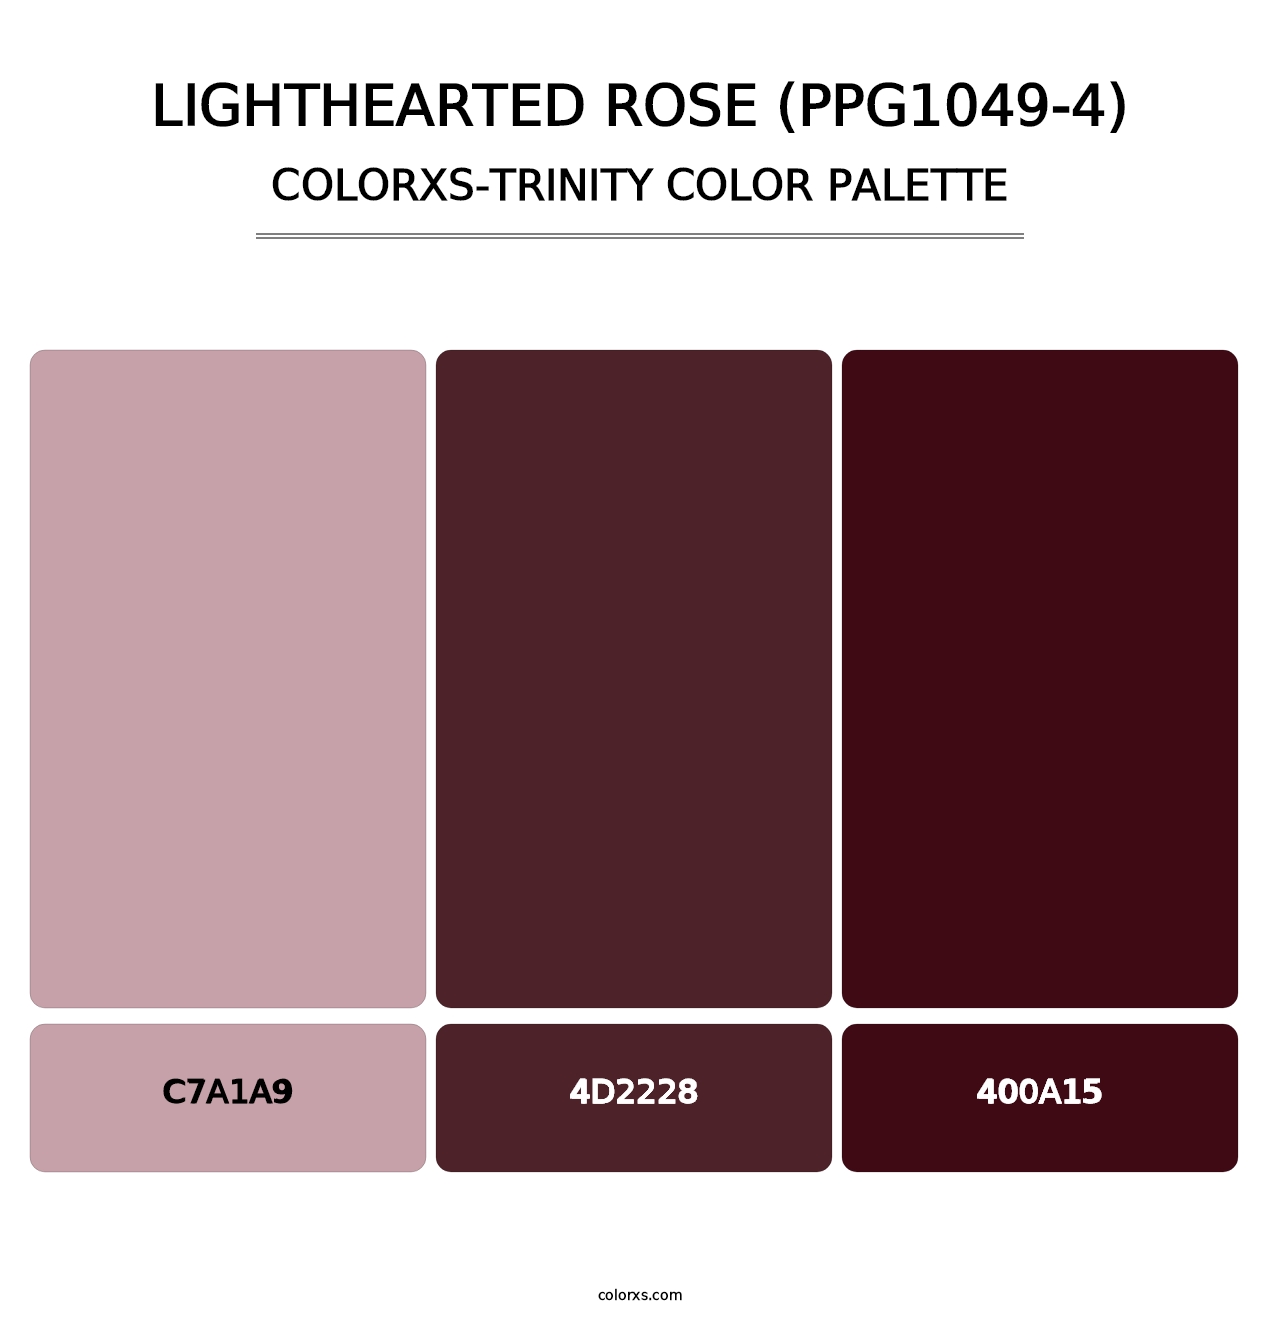 Lighthearted Rose (PPG1049-4) - Colorxs Trinity Palette